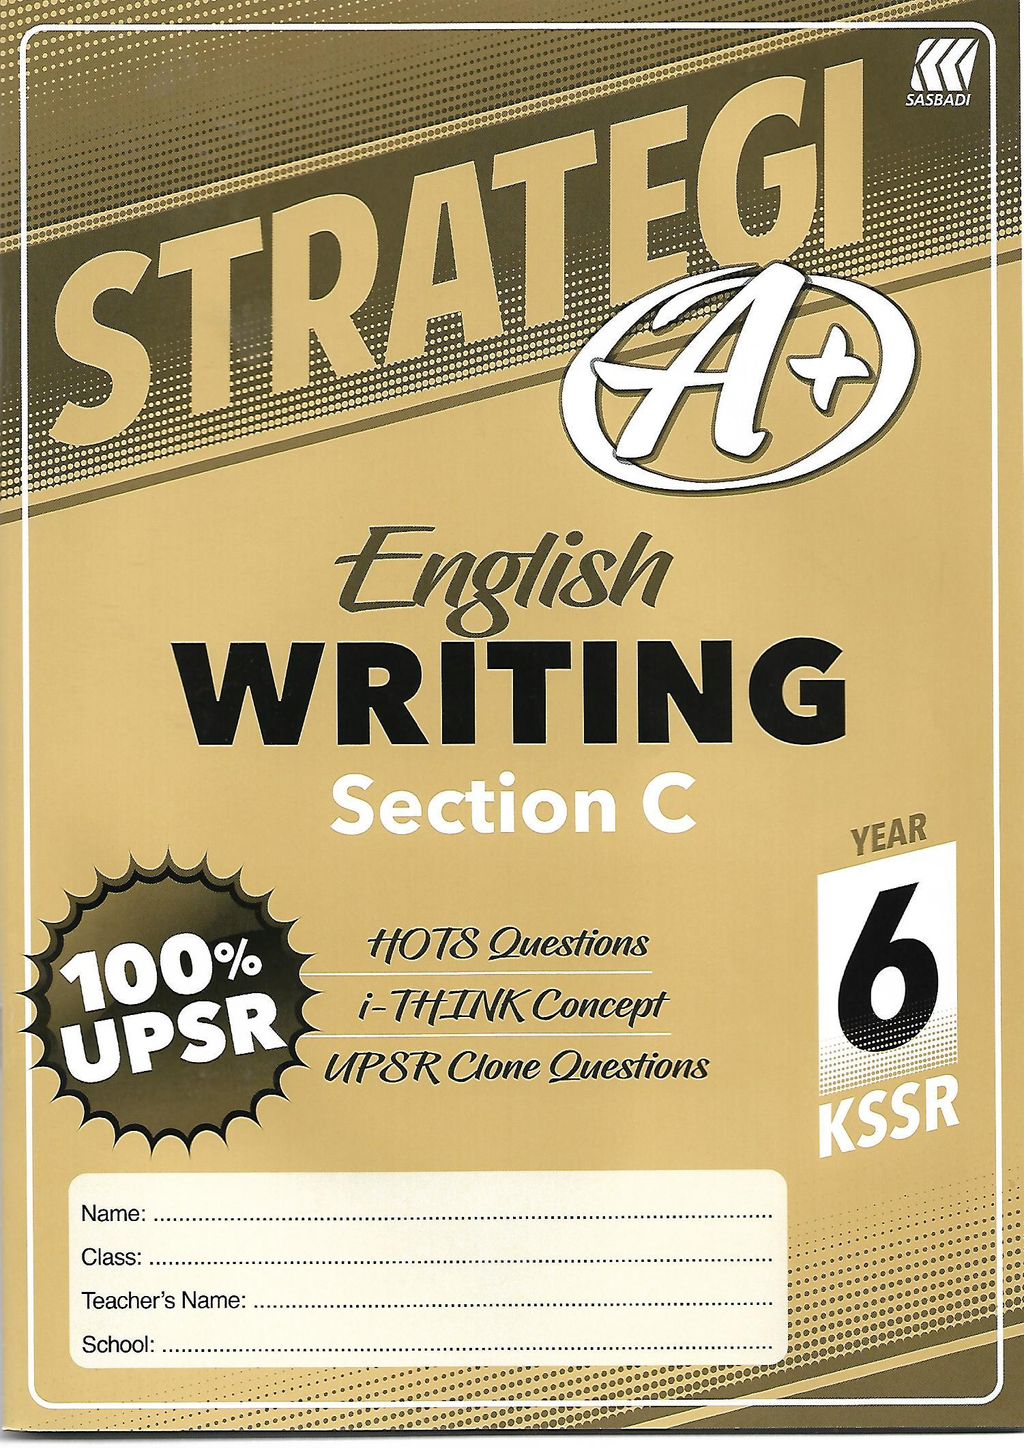 12256 COVER ENGLISH WRITING SECTION C.jpg